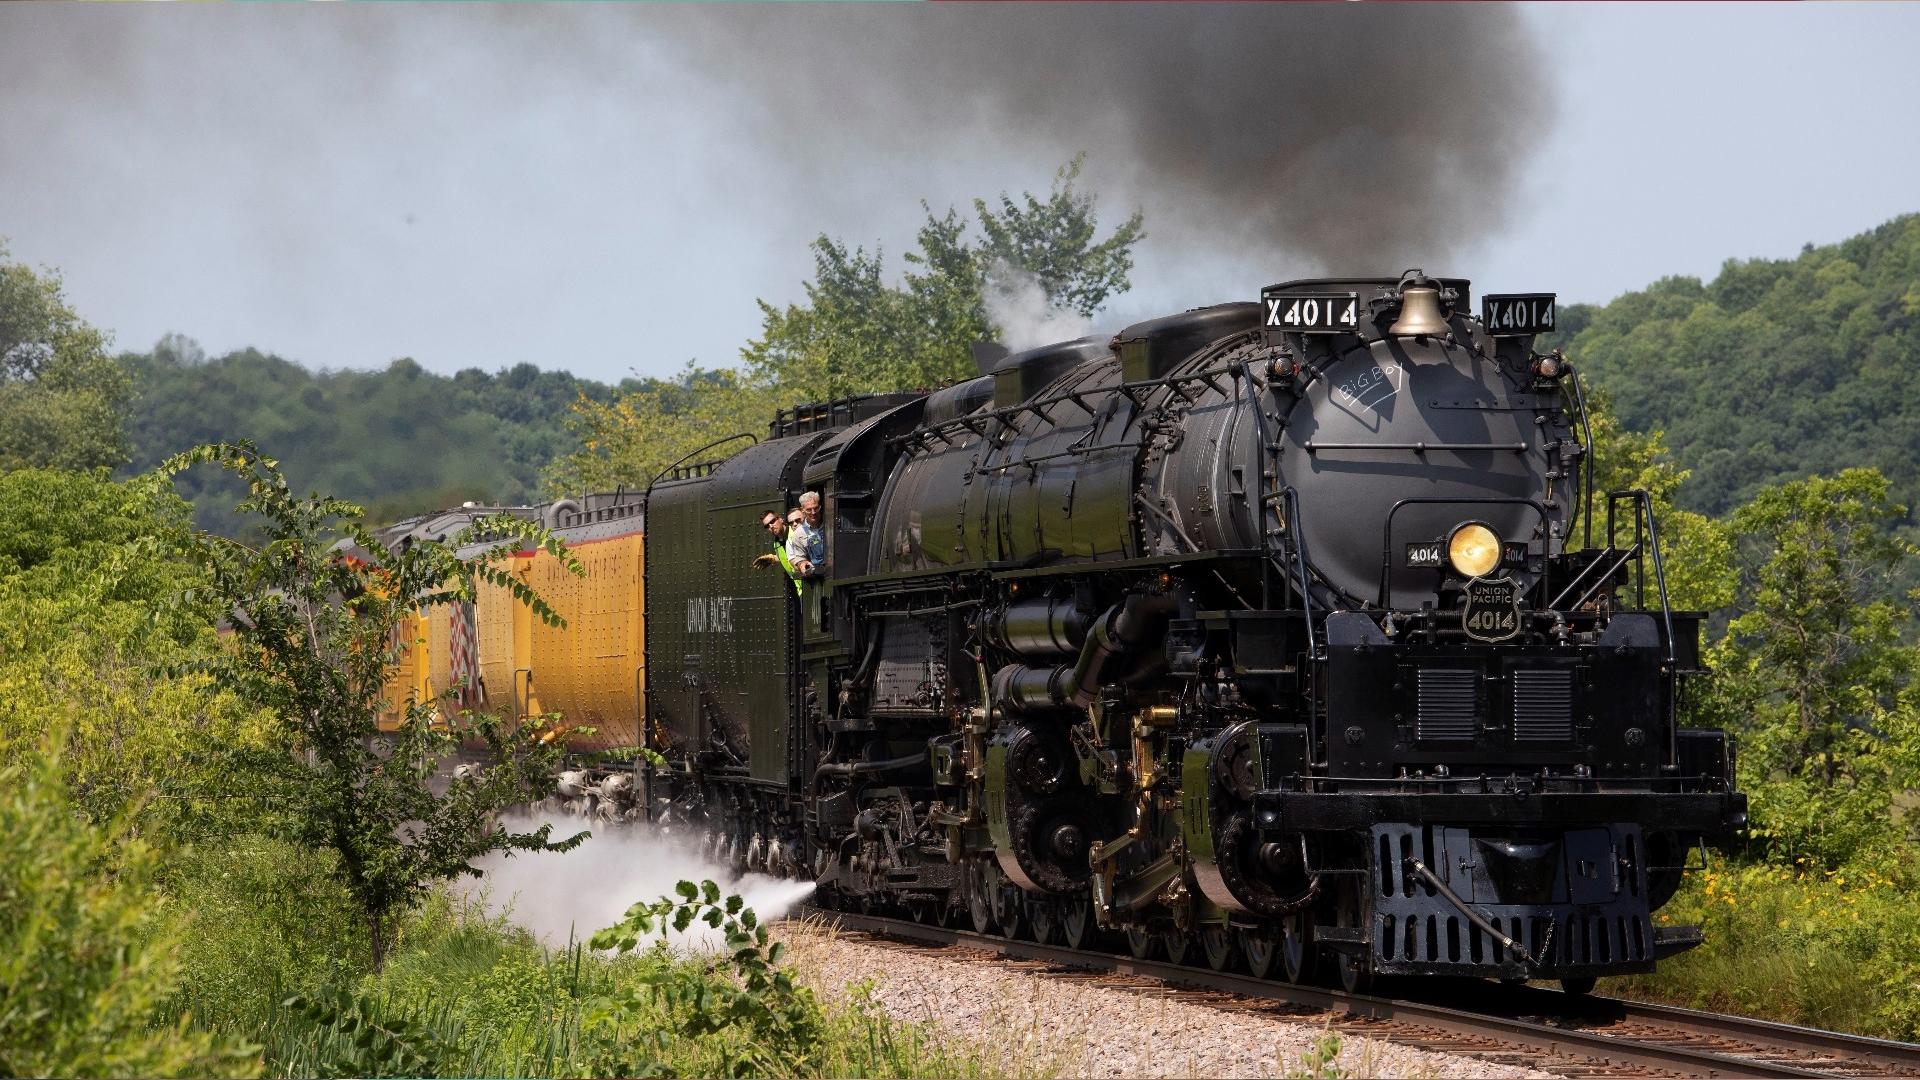 Union Pacific's Big Boy No. 4014, the world’s largest operating steam locomotive, will travel across Arkansas as part of the "Heartland of America Tour."